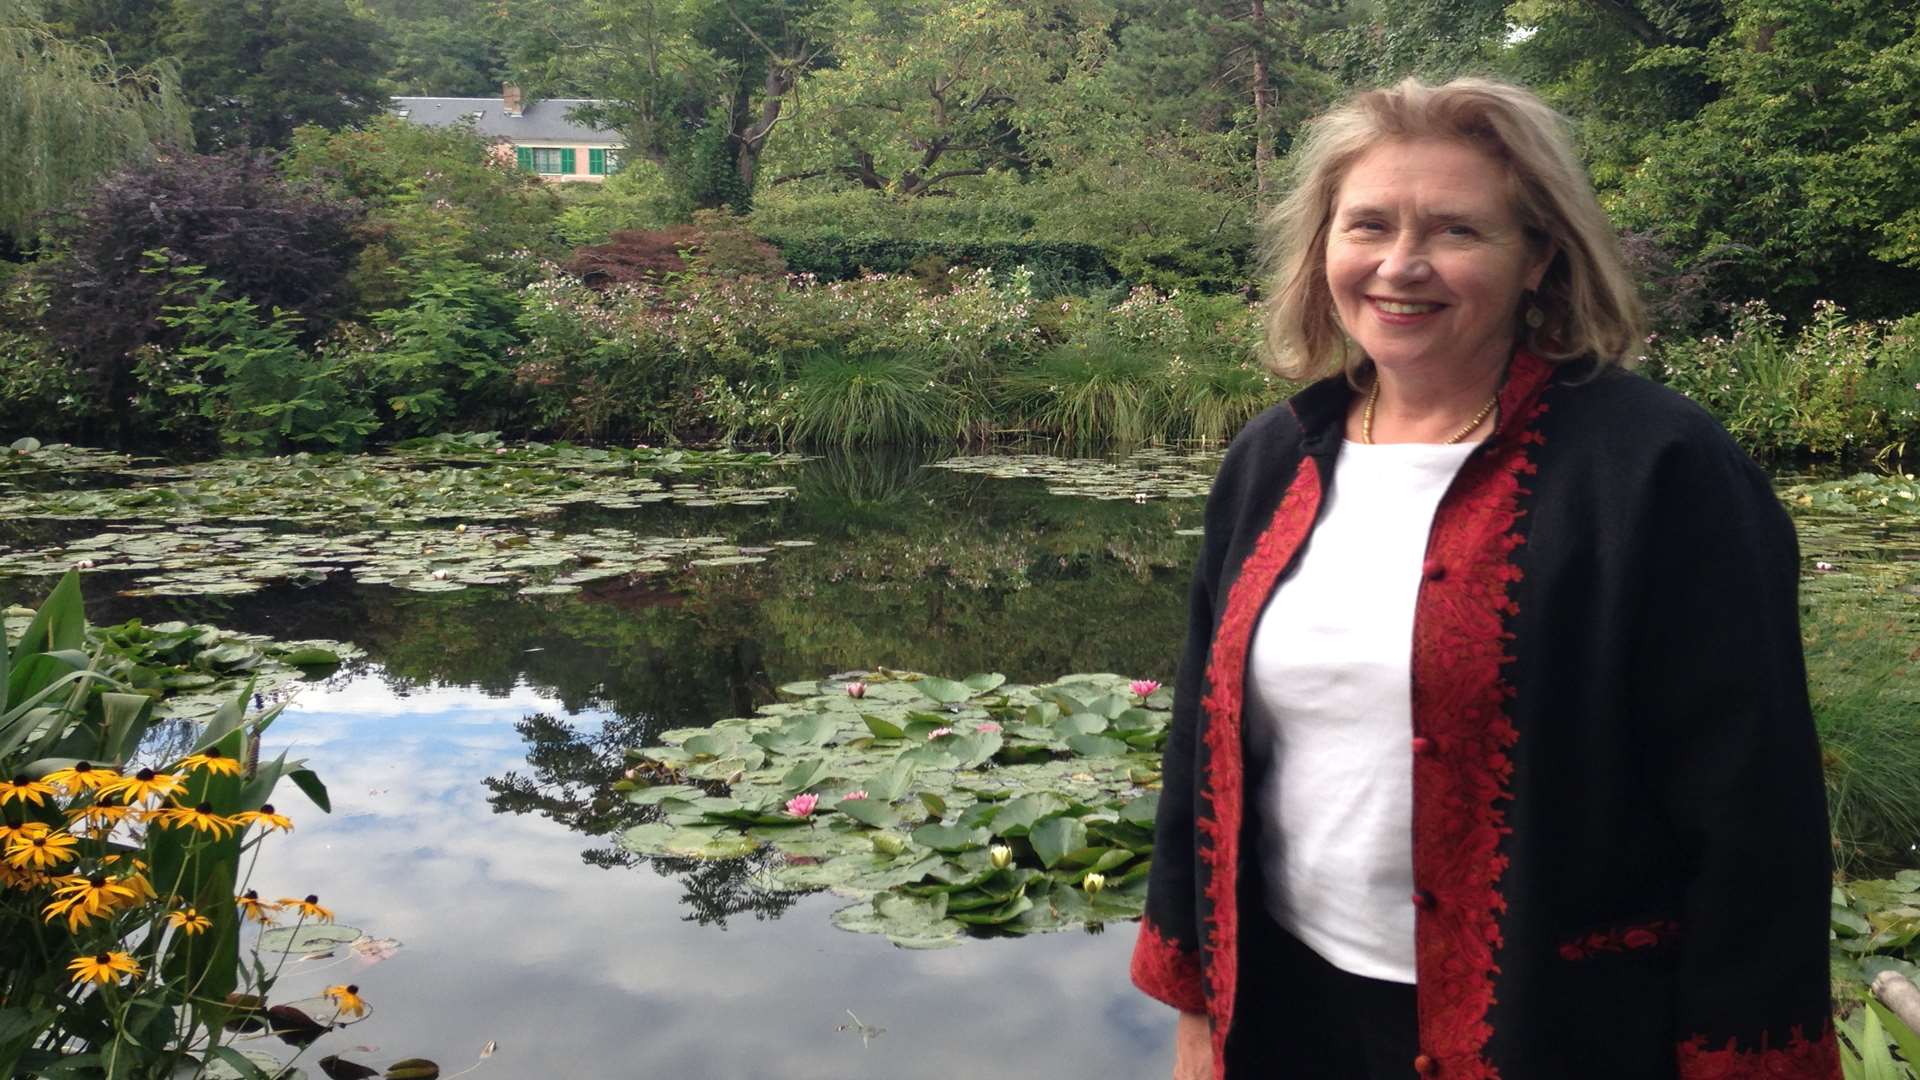 Royal Academy of Arts curator Ann Dumas at Claude Monet's former home in Giverny, France